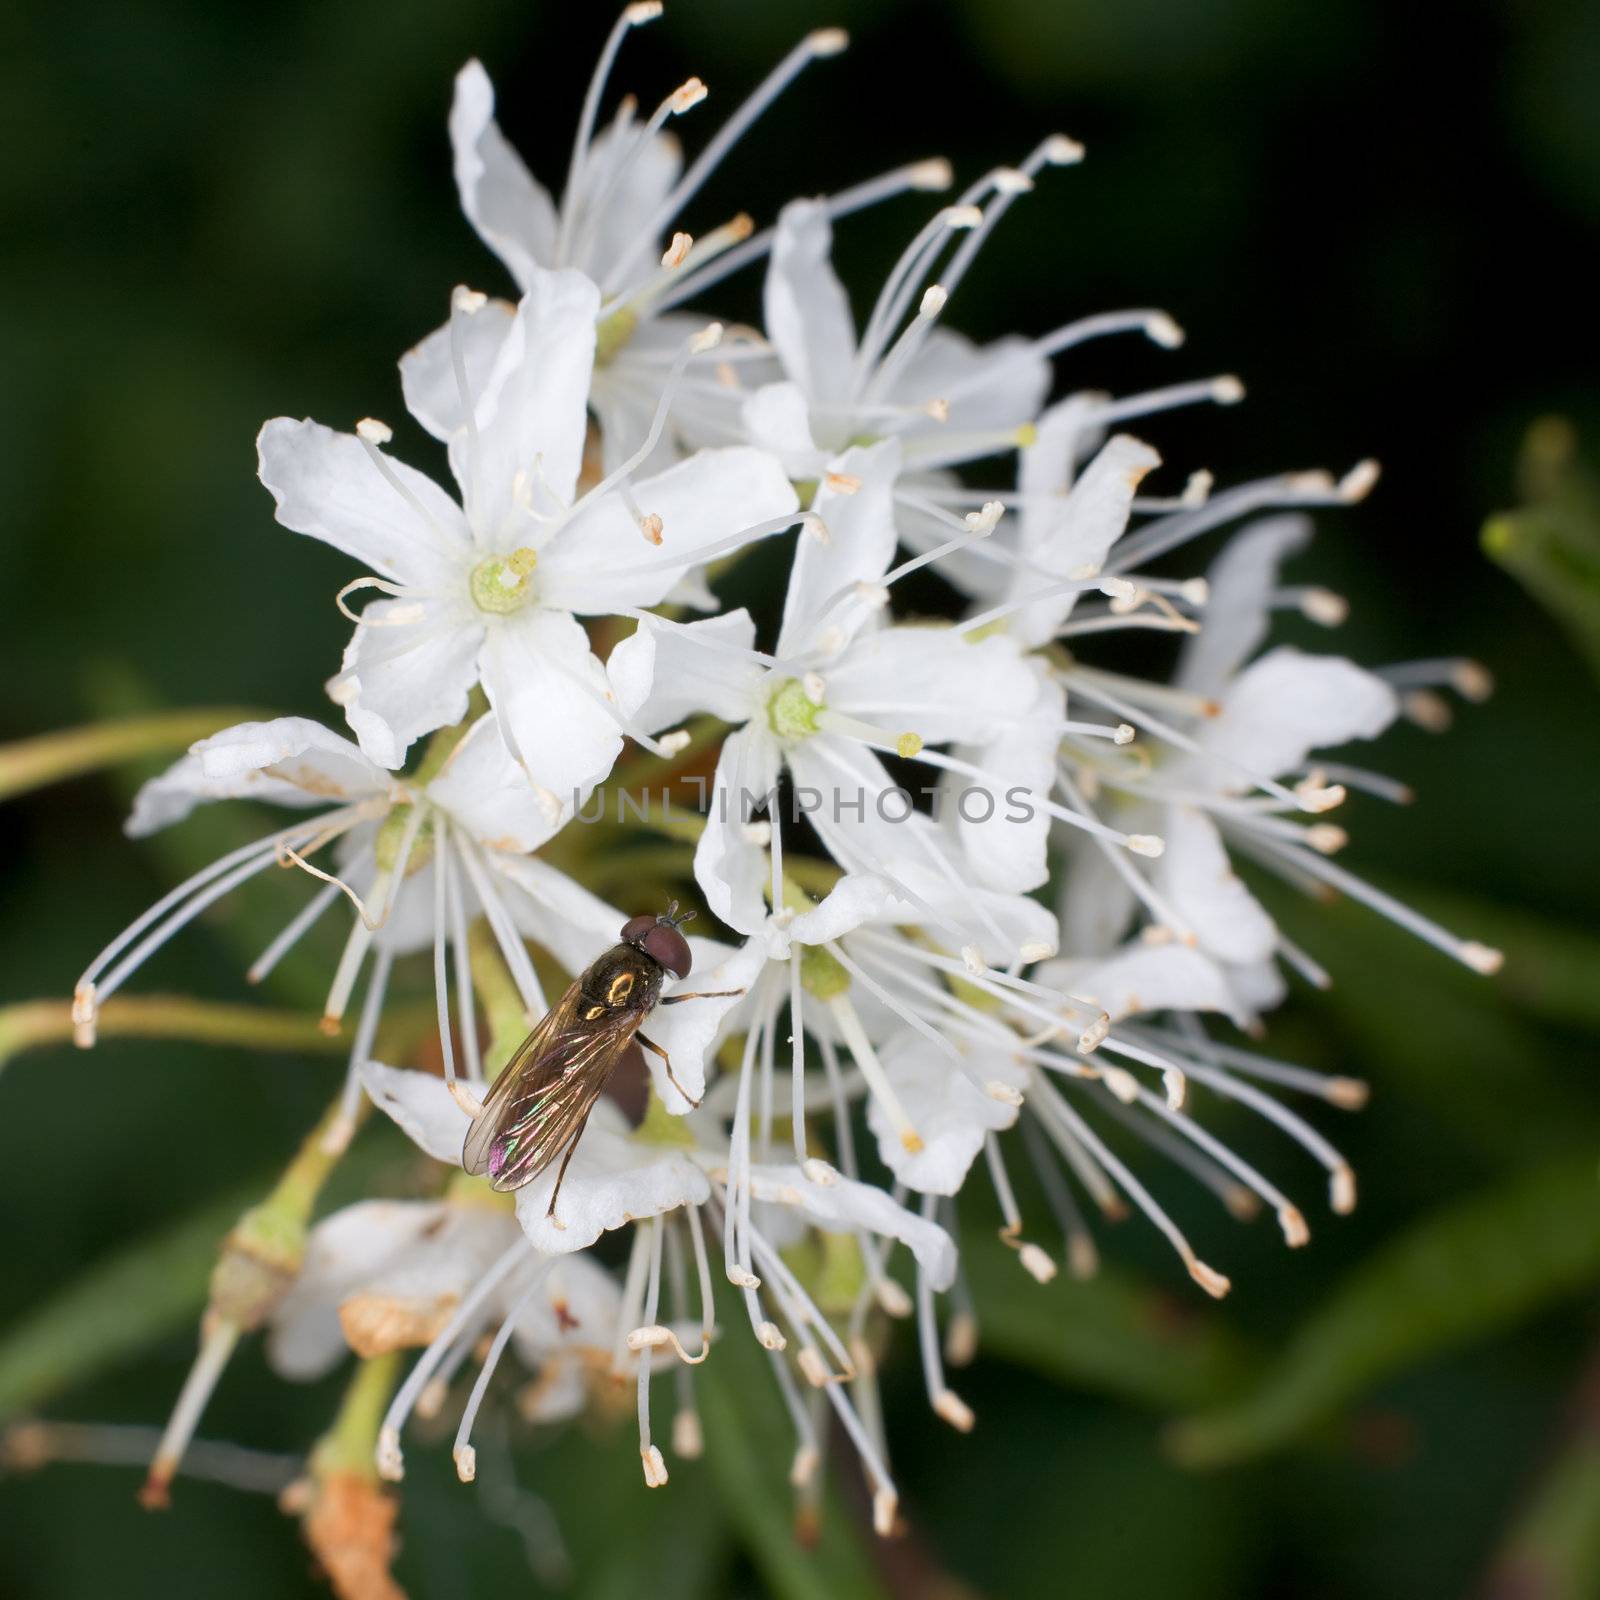 The small fly on a flower of a labrador tea